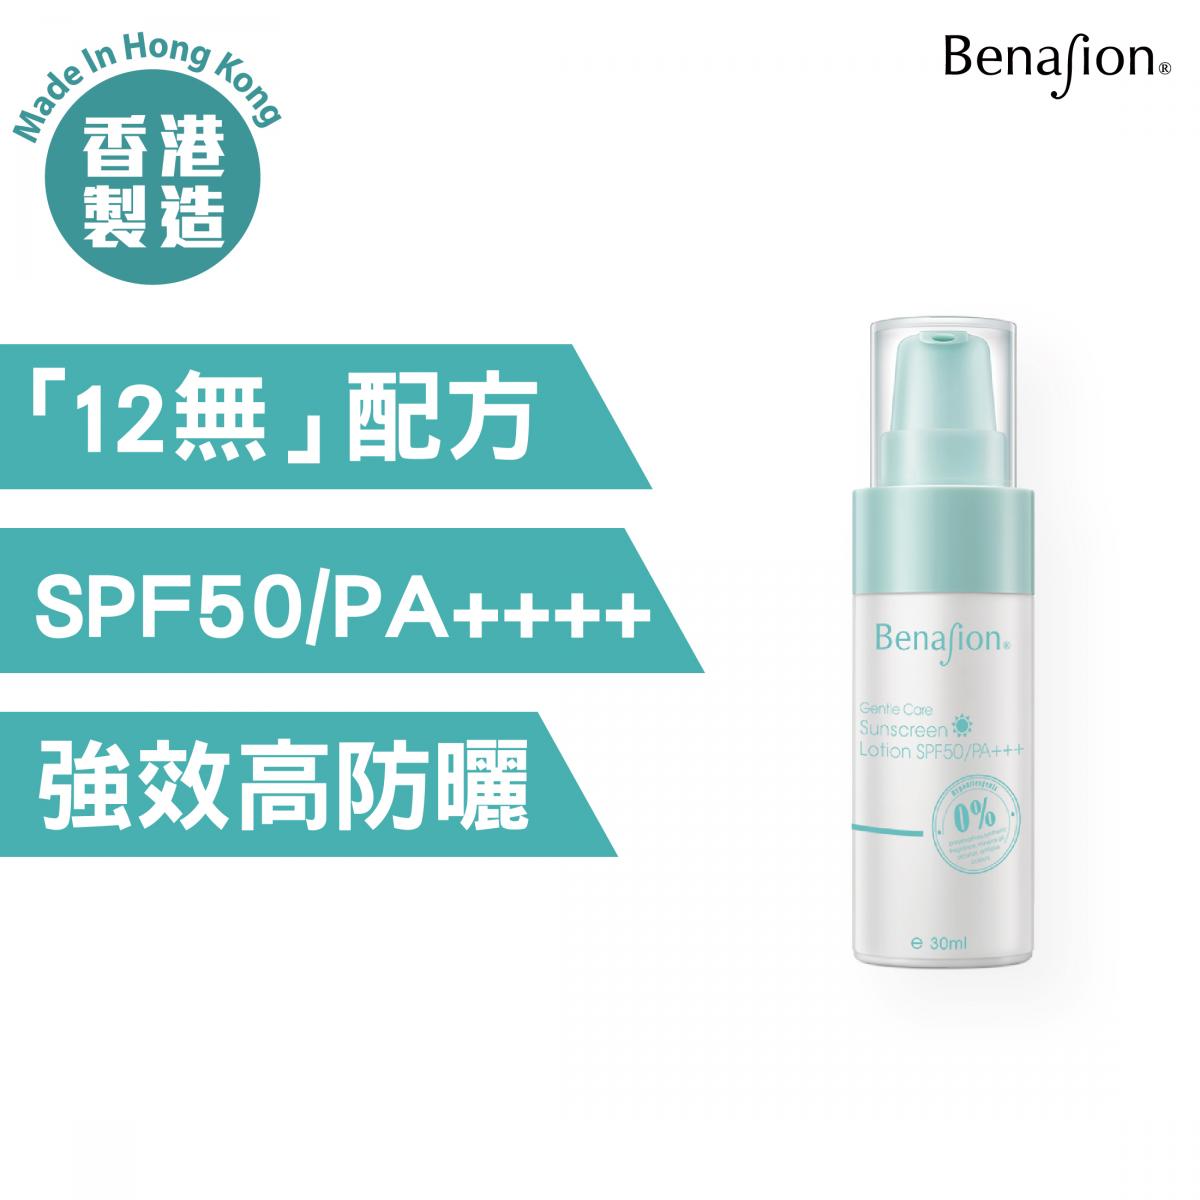 Gentle Care Sunscreen Lotion SPF50/PA+++ (30 ml)